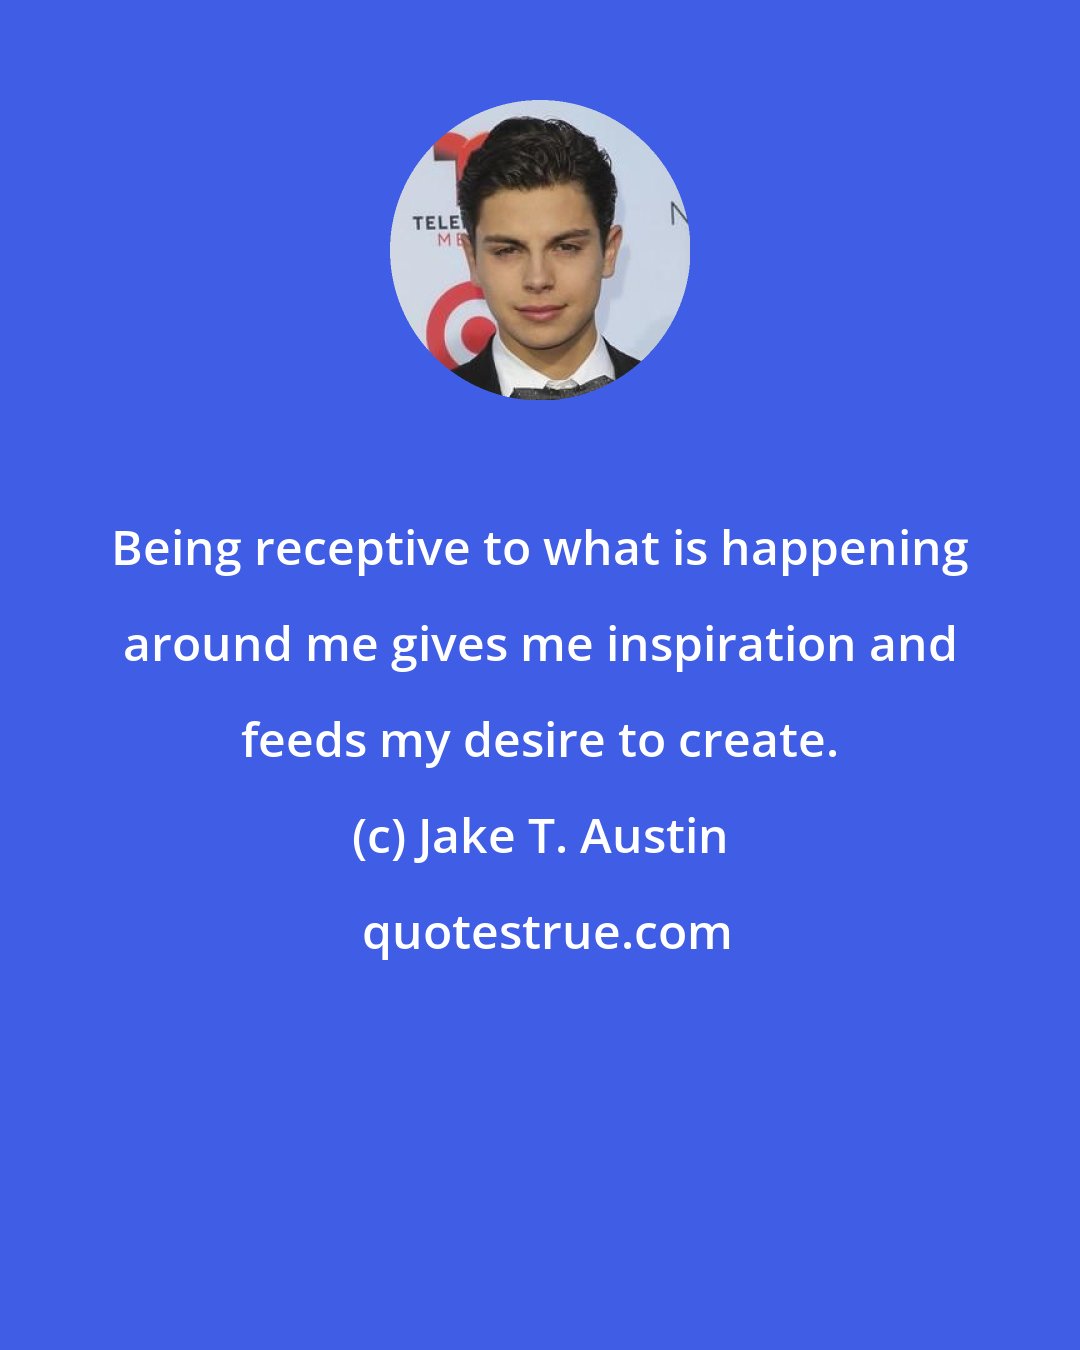 Jake T. Austin: Being receptive to what is happening around me gives me inspiration and feeds my desire to create.